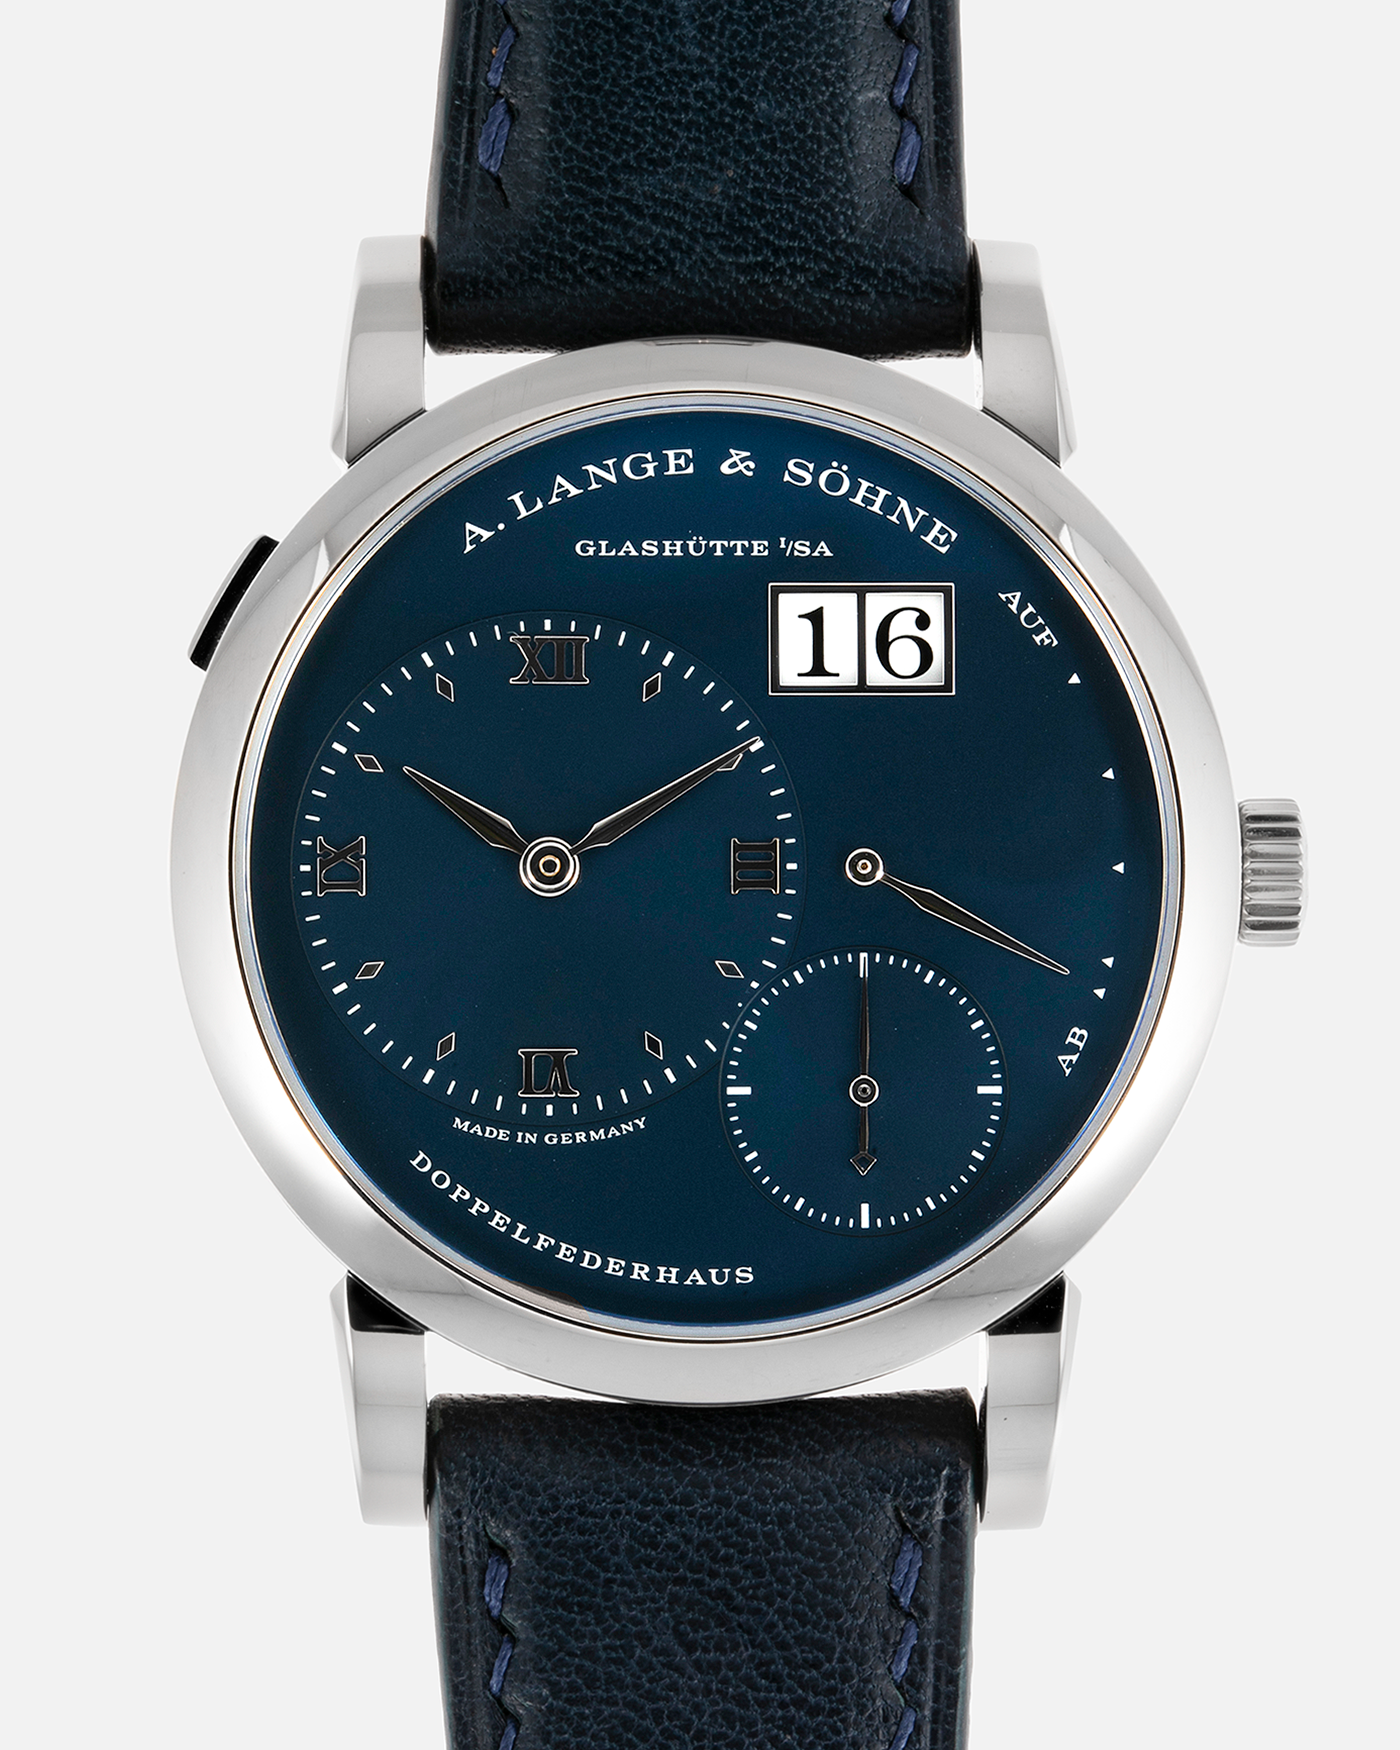 Brand: A. Lange & Söhne Year: 2017 Model: Lange 1 Reference Number: 191.028 Material: 18-carat White Gold Movement: Cal. L121.1, Manual-Winding Case Diameter: 38.5mm Bracelet/Strap: Dark Blue Calf Strap and A. Lange & Söhne Dark Blue Alligator Leather with Signed Tang Buckle 